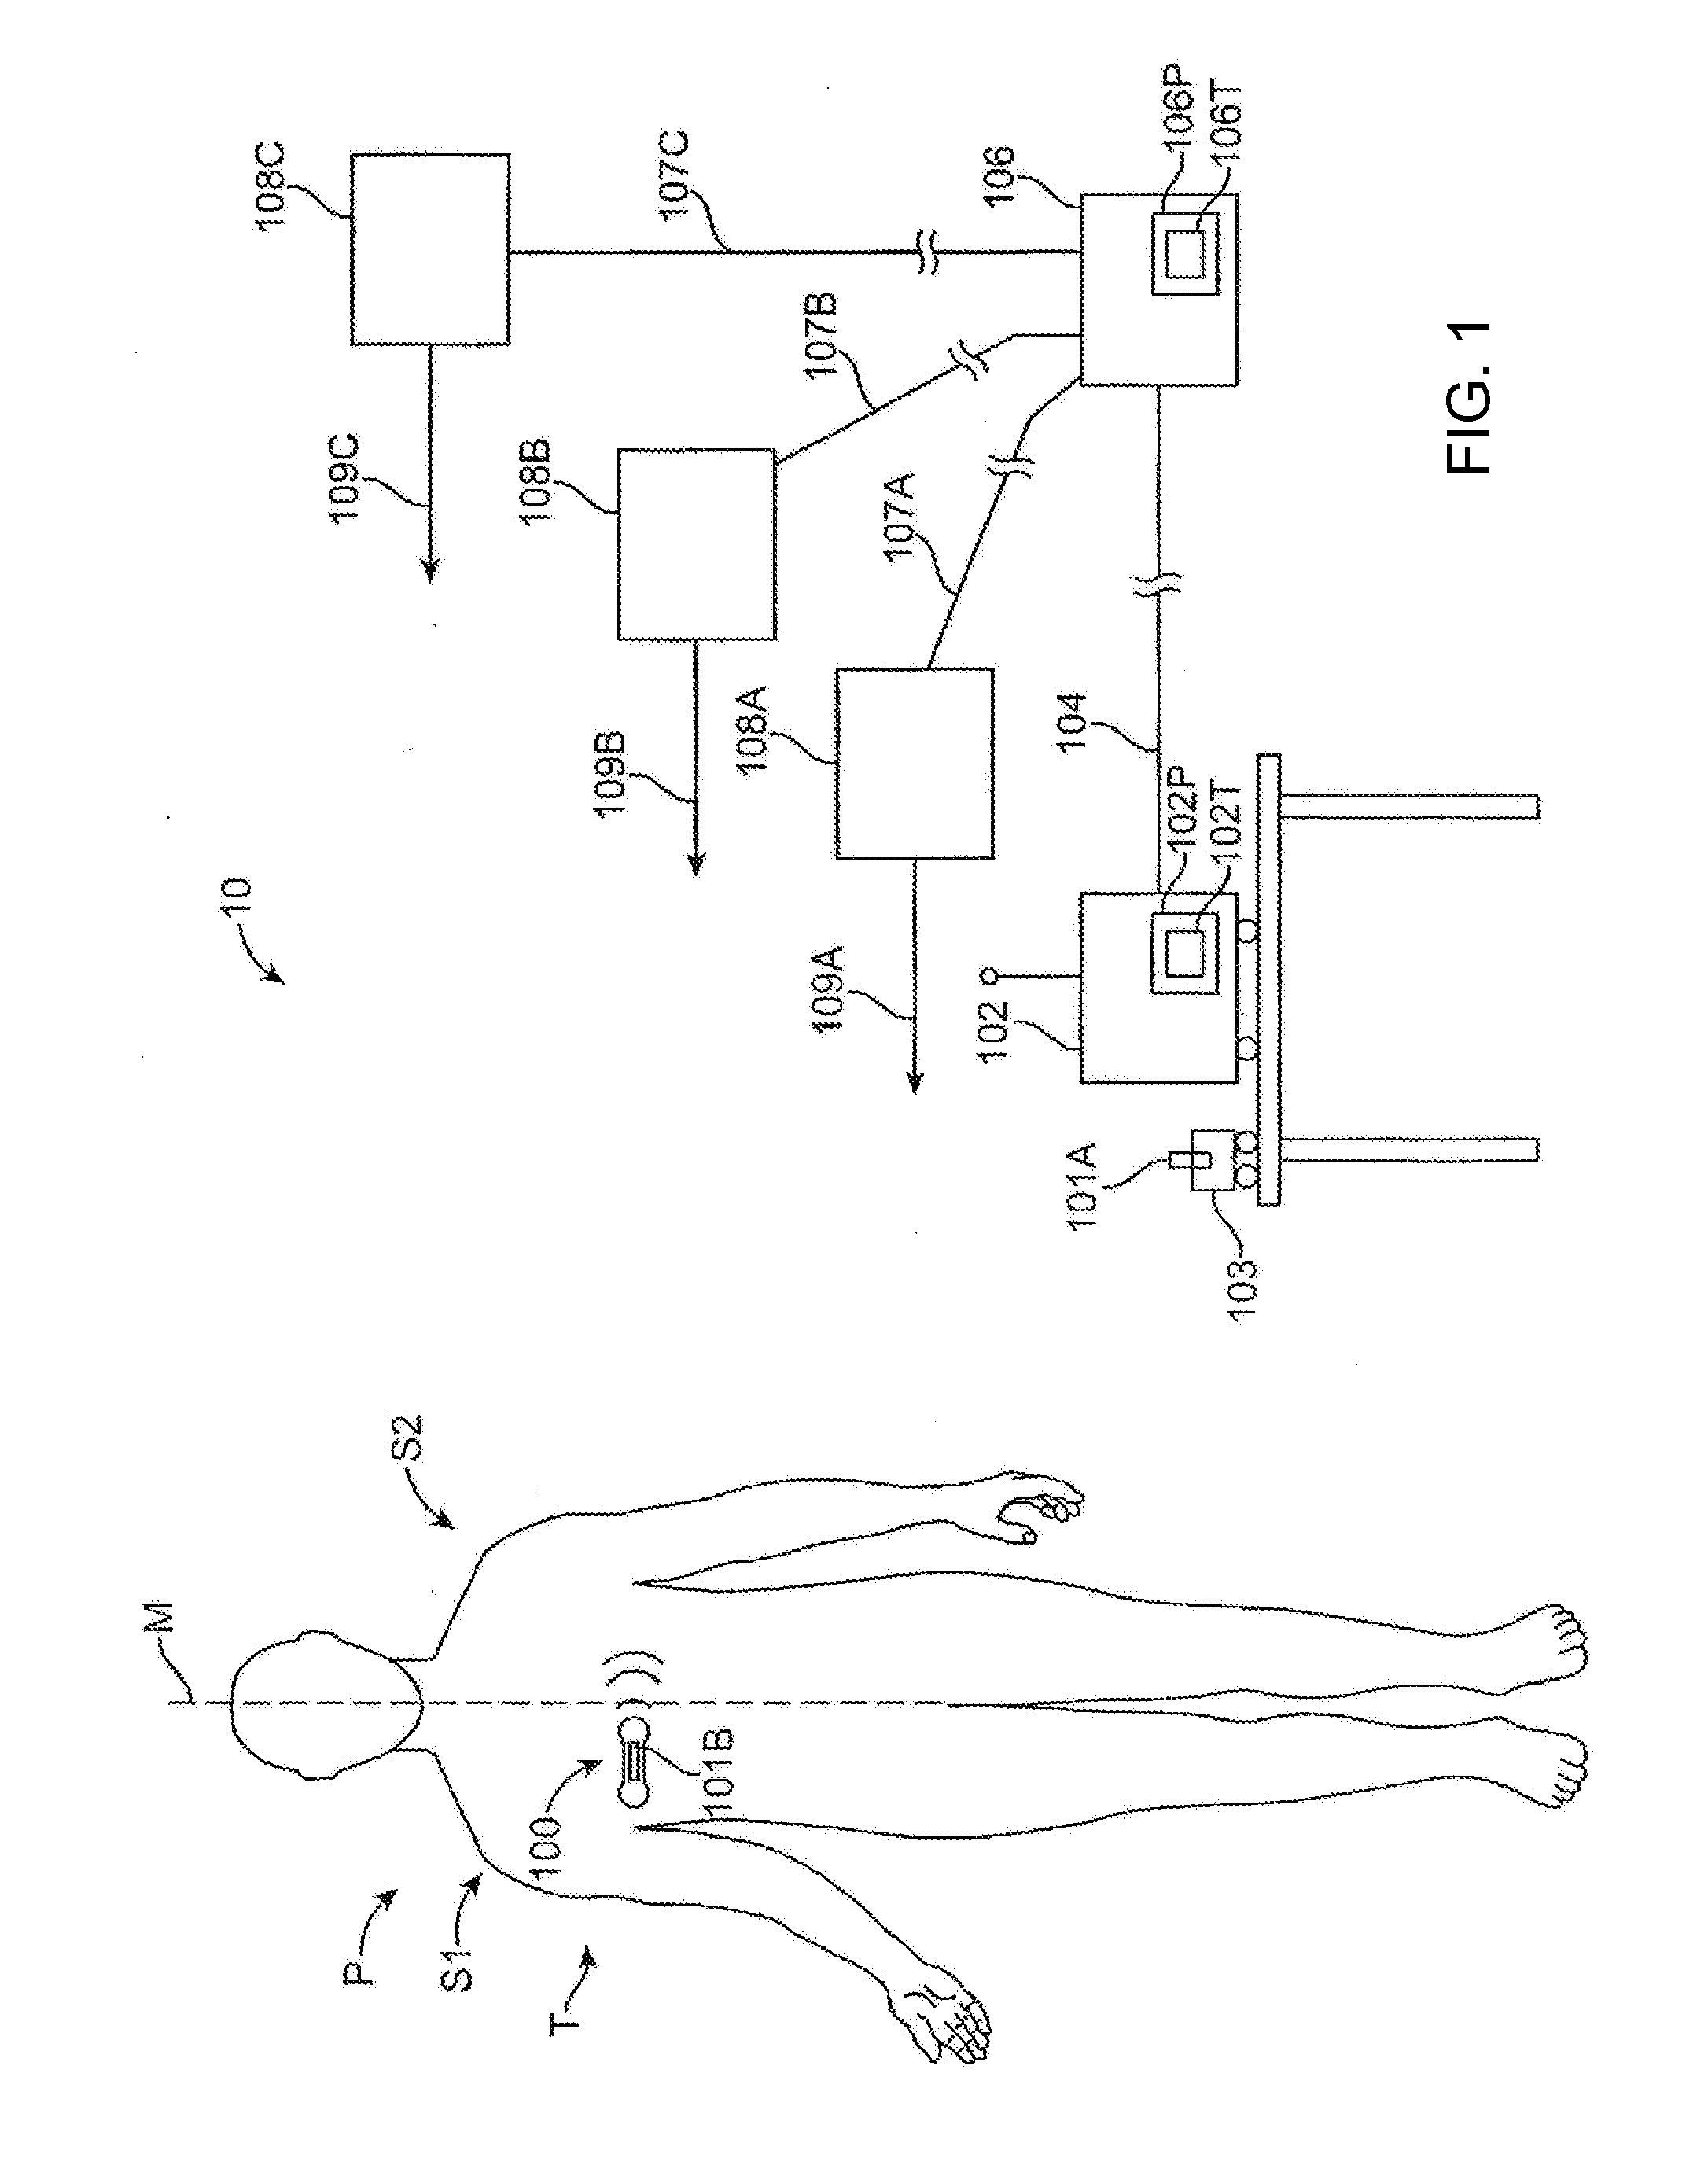 Method and apparatus for personalized physiologic parameters